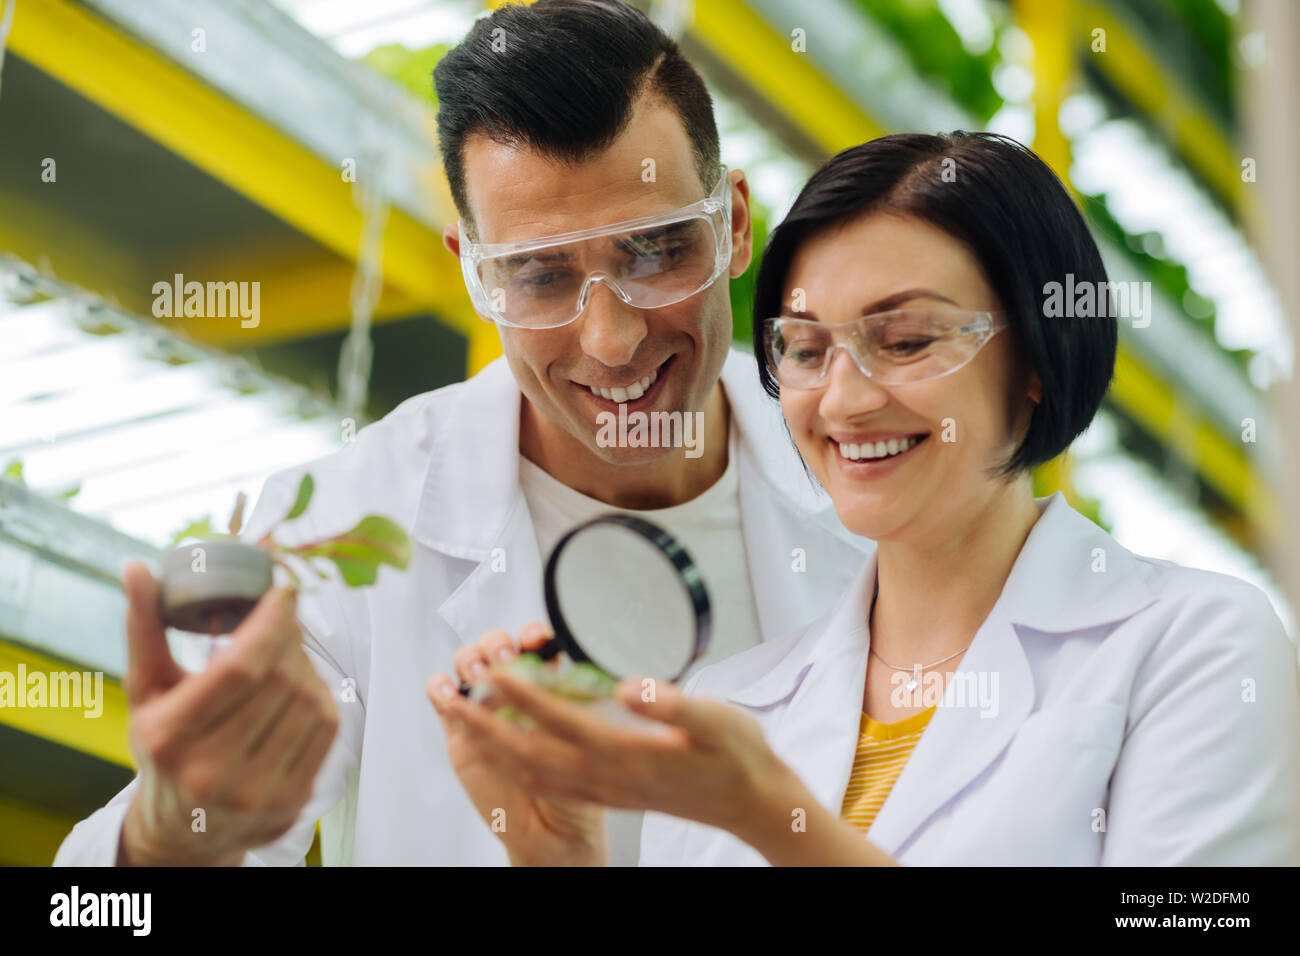 Couple of agriculturists smiling while working together Stock Photo